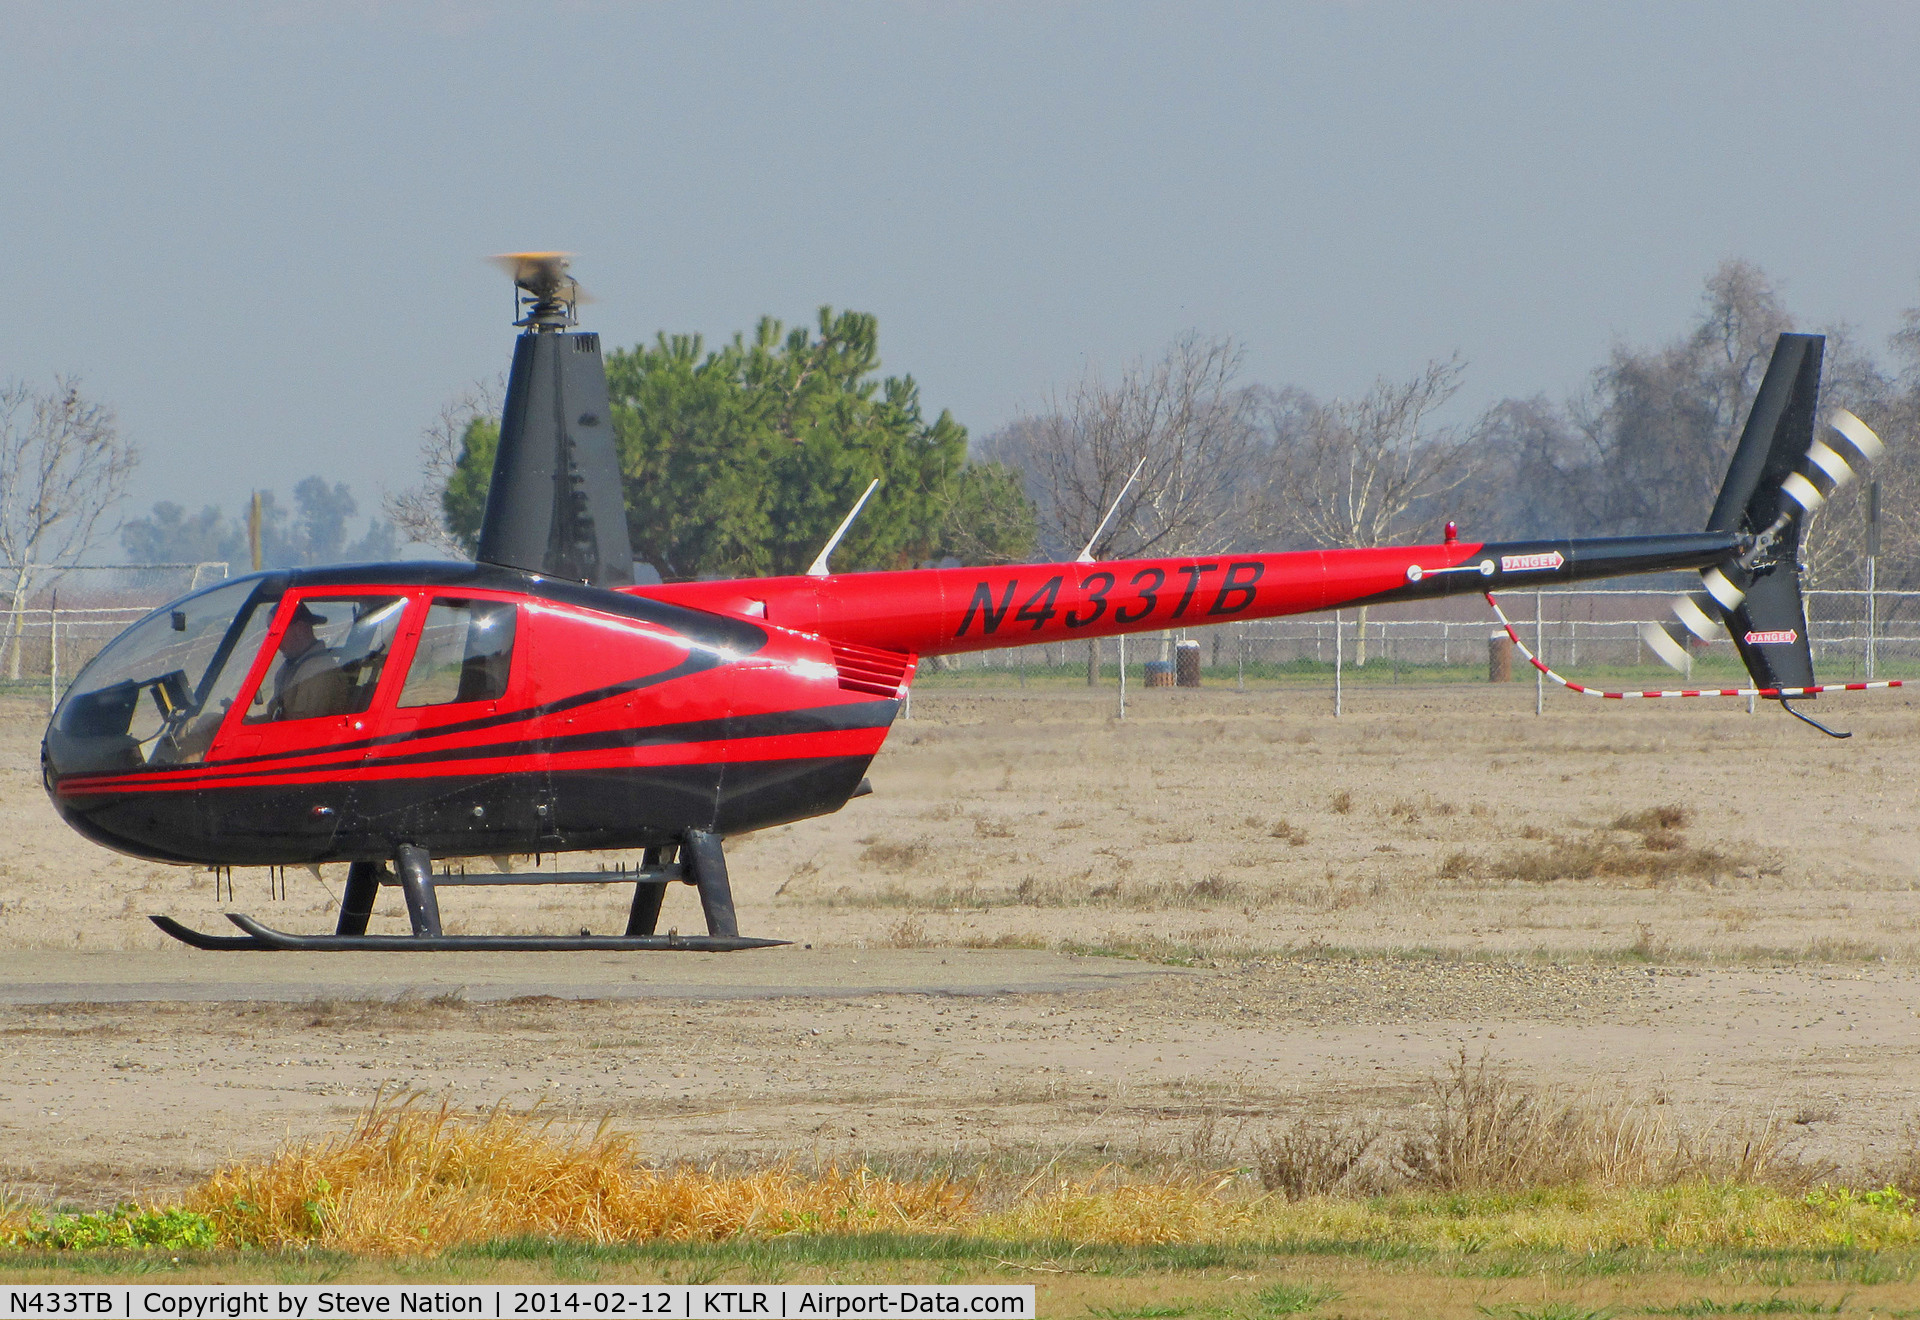 N433TB, 2006 Robinson R44 II C/N 11425, Locally-based Blue Sky Aviation Robinson R-44 II while still operating with College of the Sequoia's helicopter training program